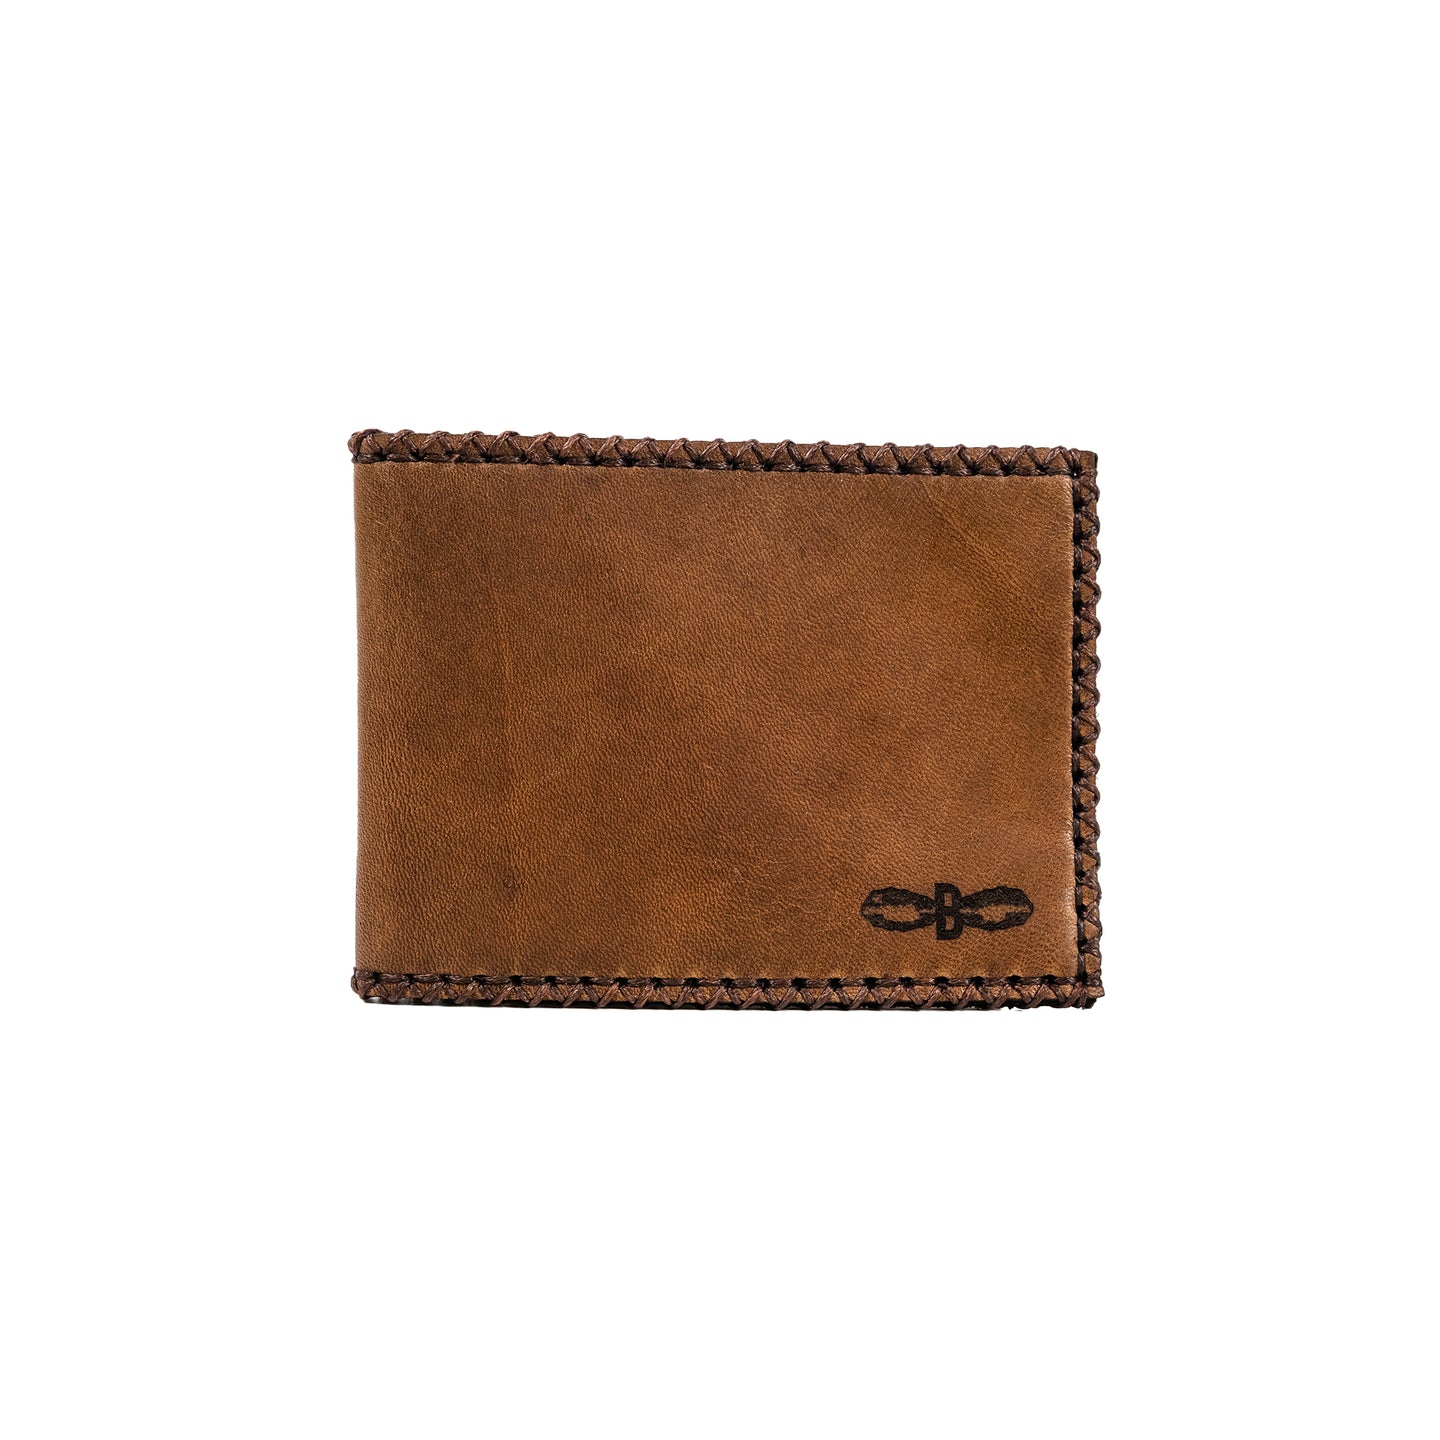 CLASSIC ITALIAN LEATHER WALLETS